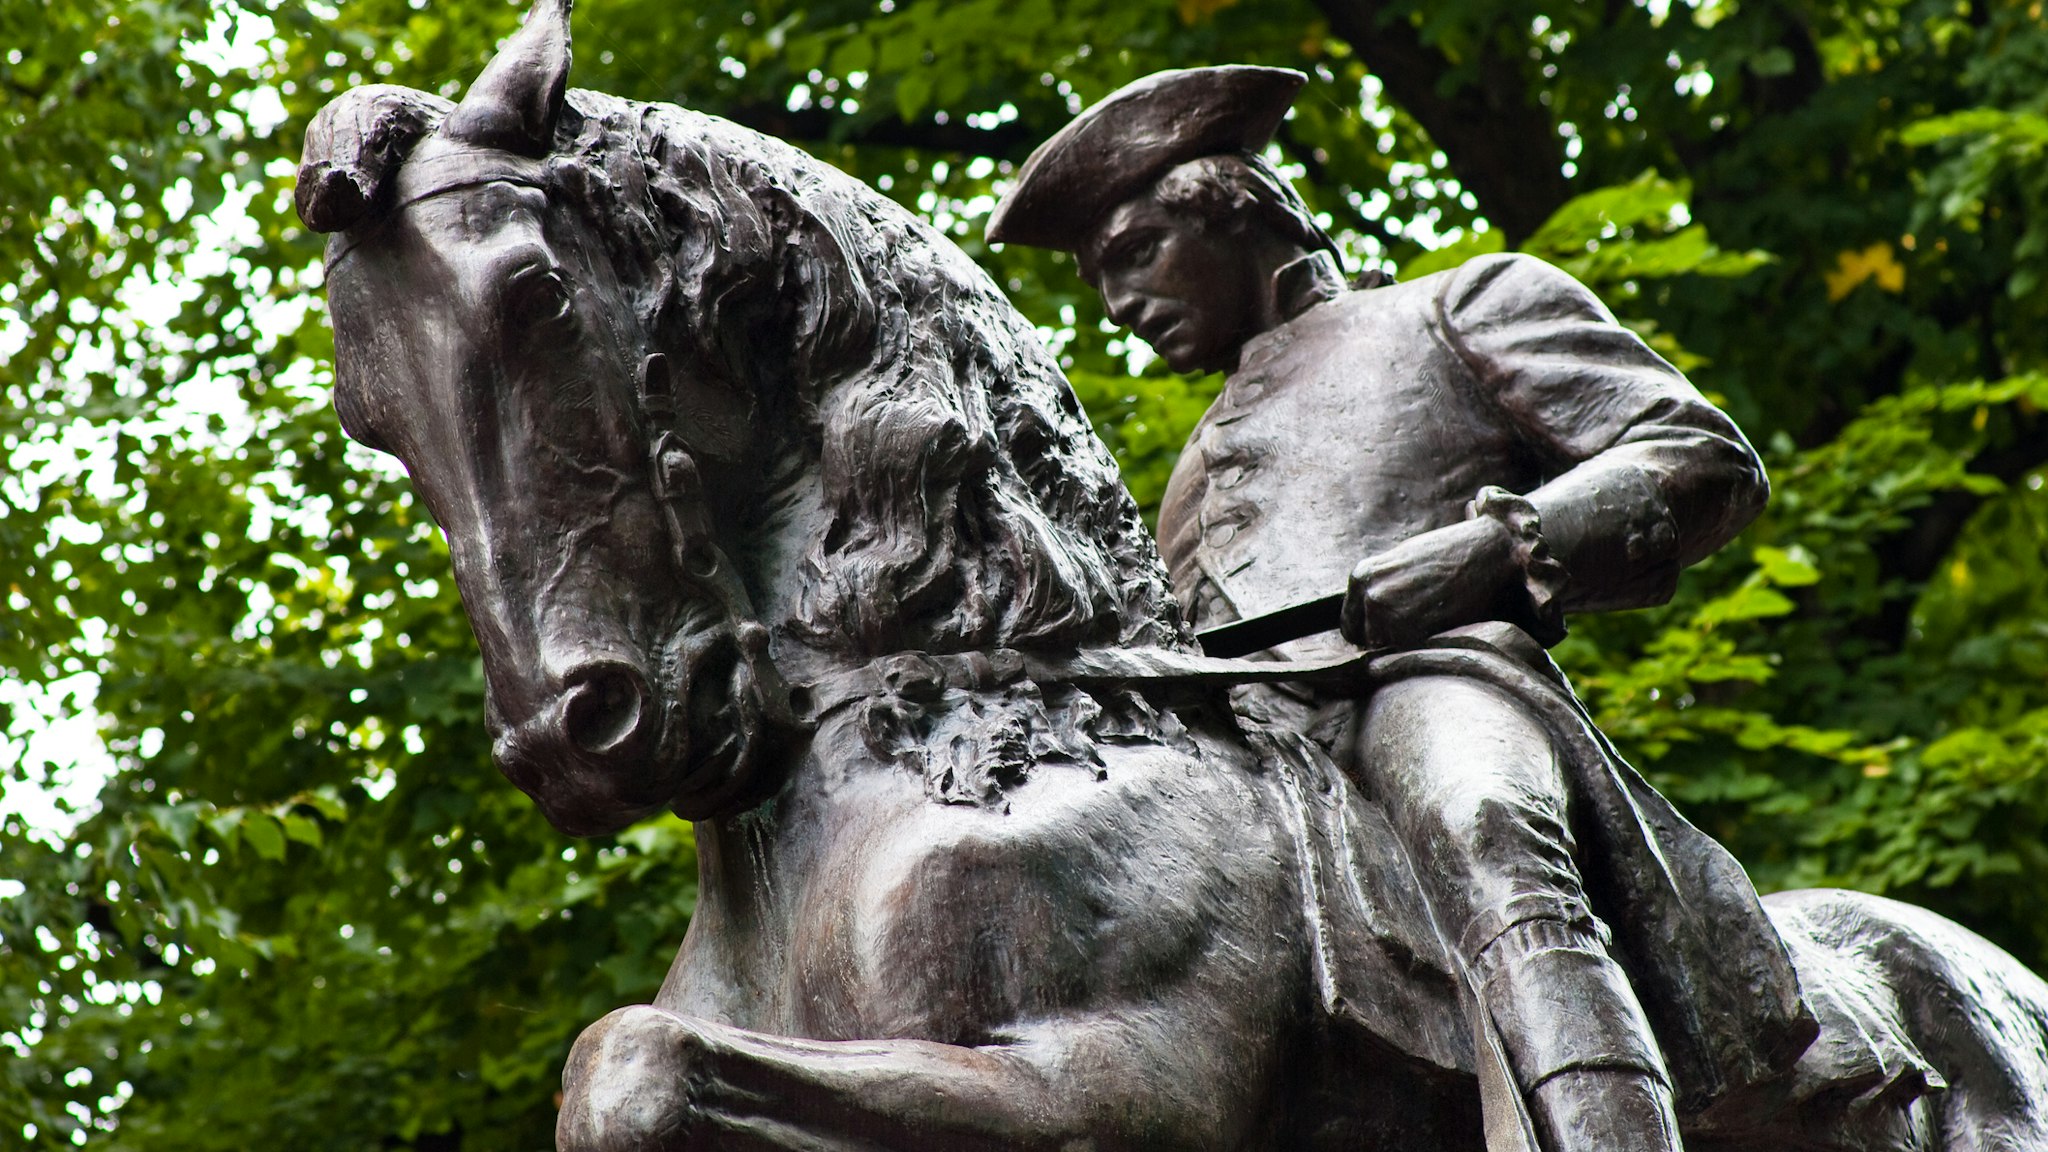 The Paul Revere statue in North End Boston, MA, sculpted by Cyrus Dallin and unvieled on September 22, 1940."